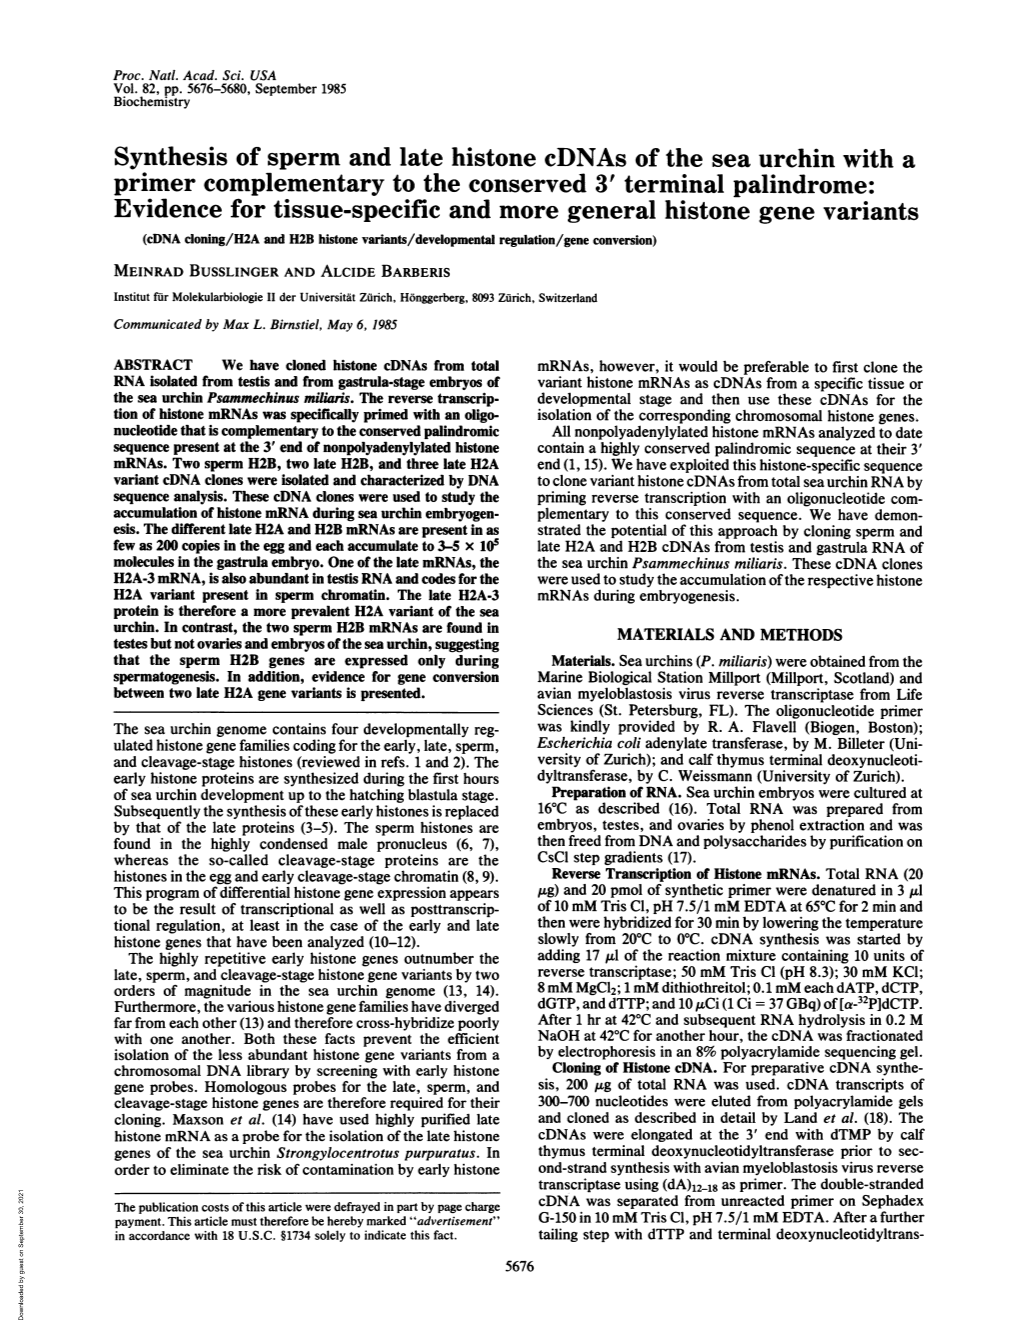 Synthesis of Sperm and Late Histone Cdnas of the Sea Urchin